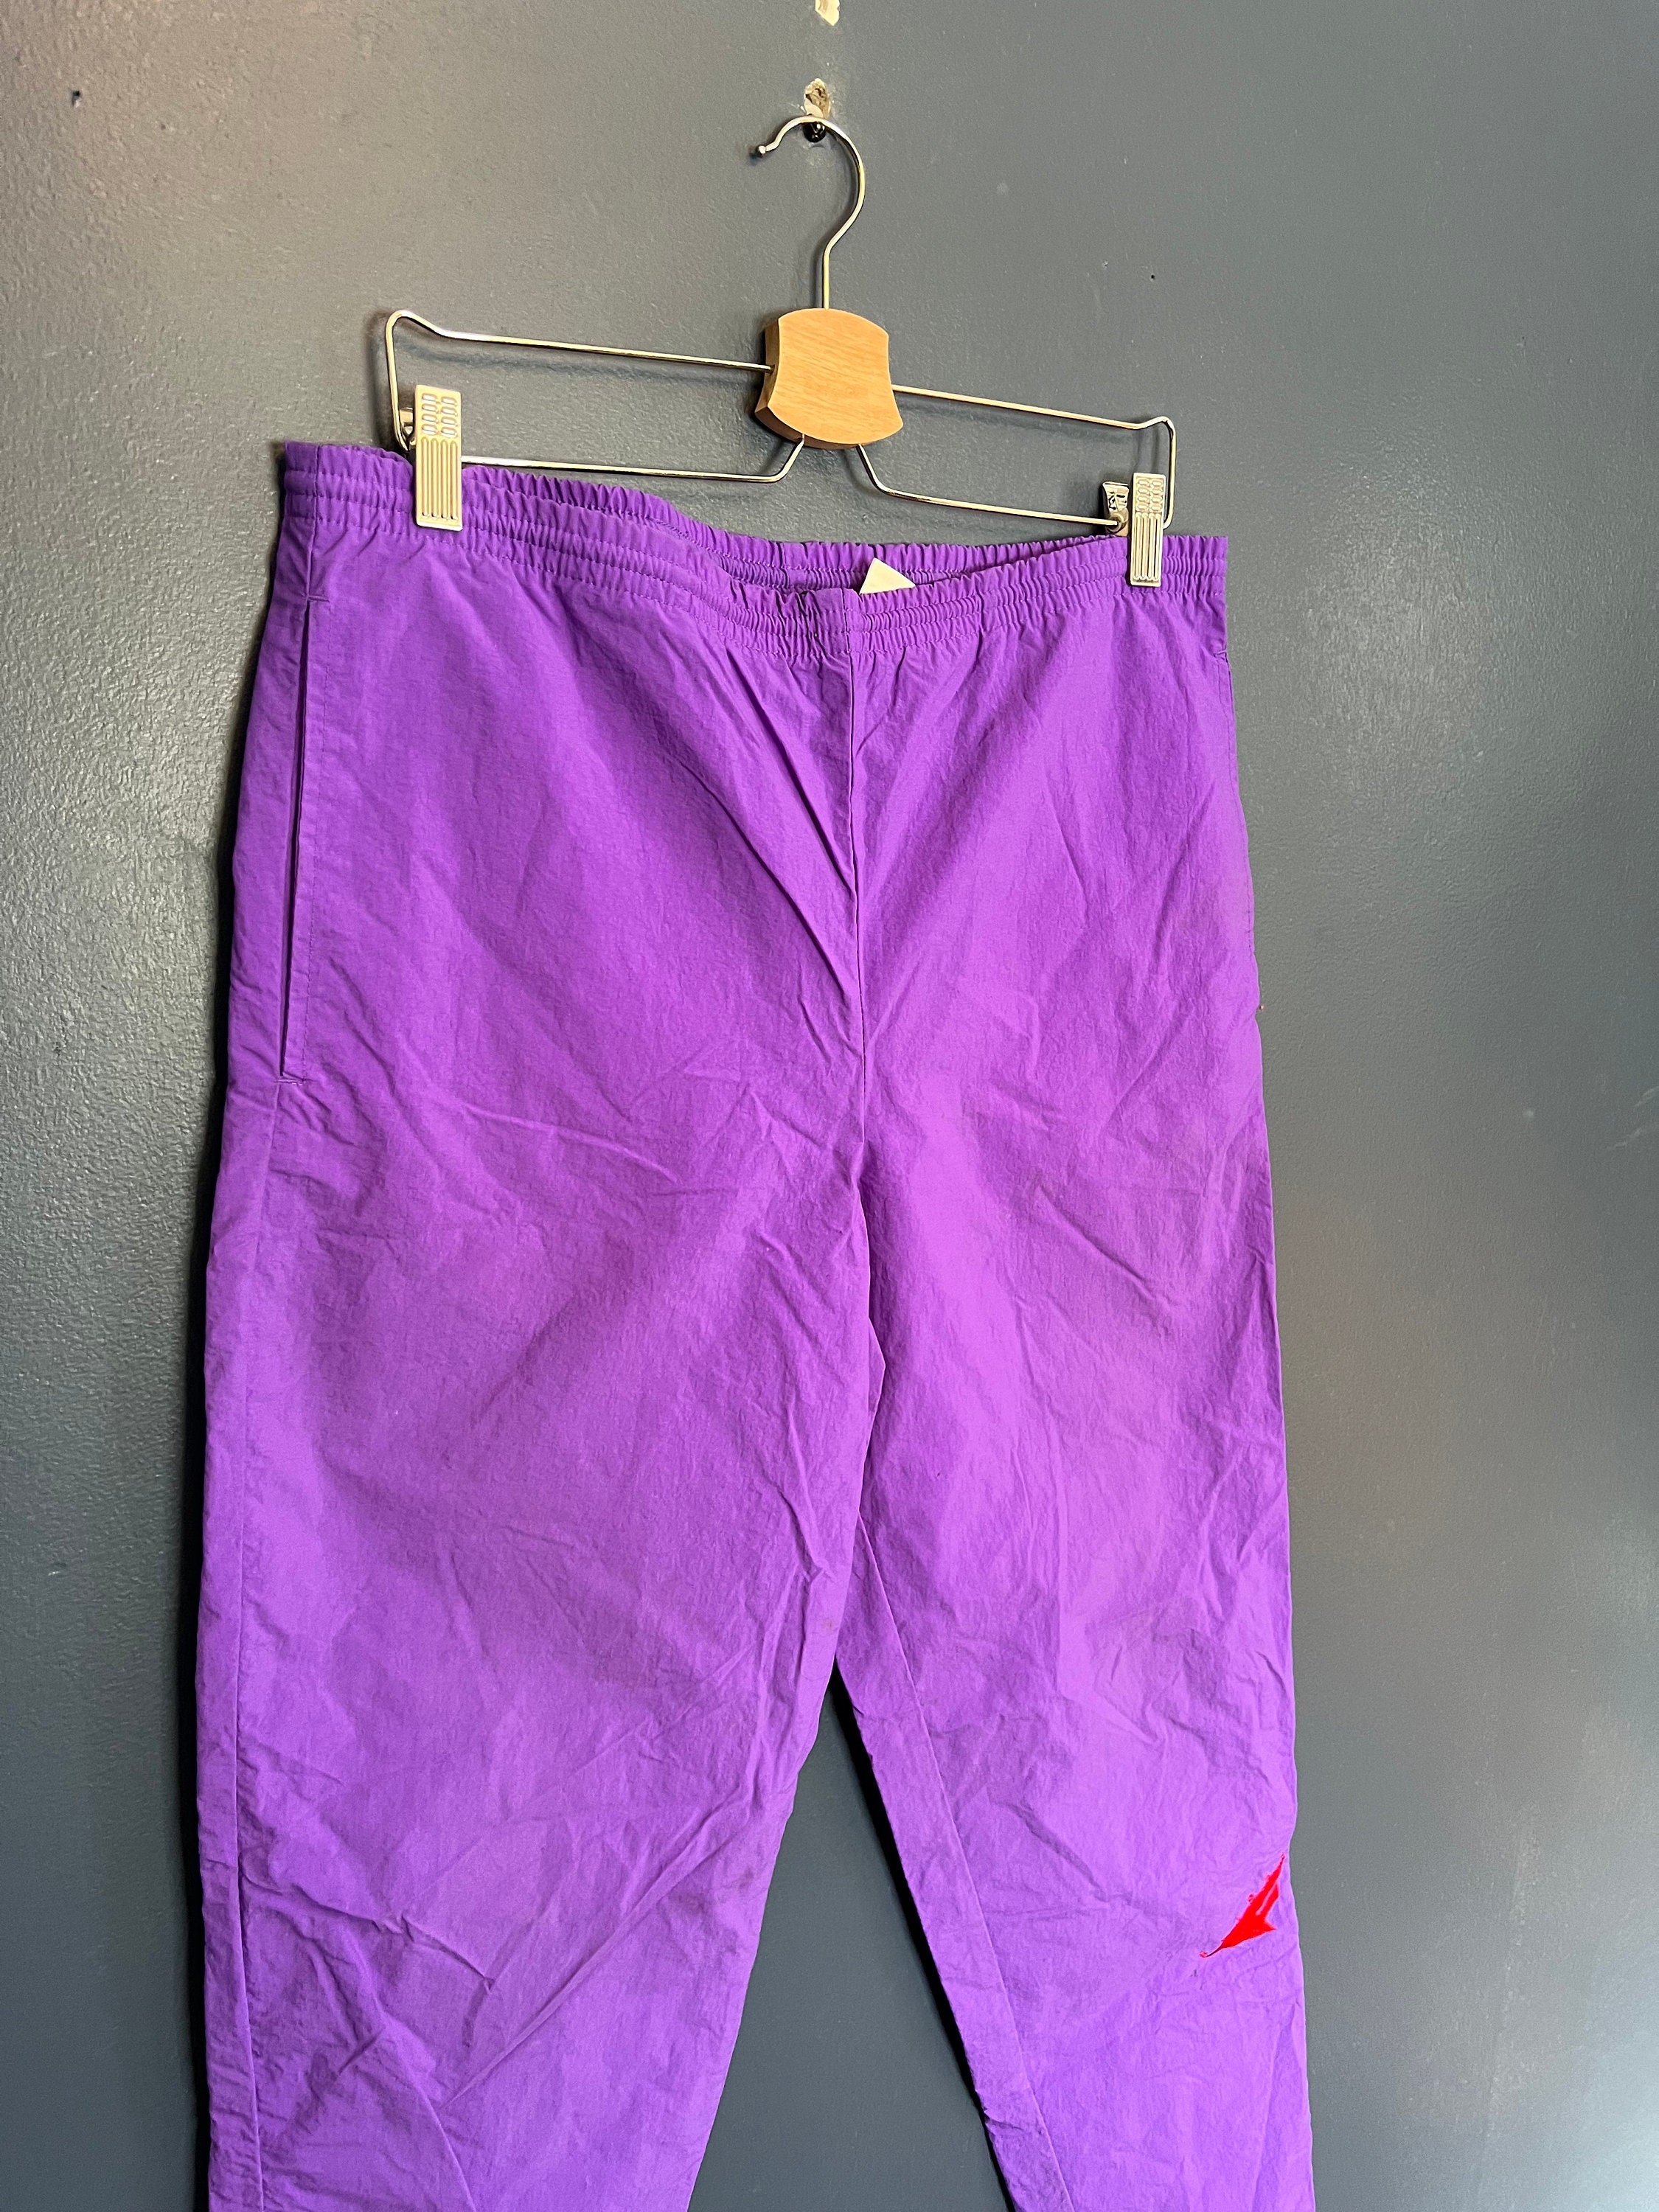 80s Track and Court Basketball Warm up Sweatshirt Pants Vintage M Purple  Pink or Blue -  Denmark